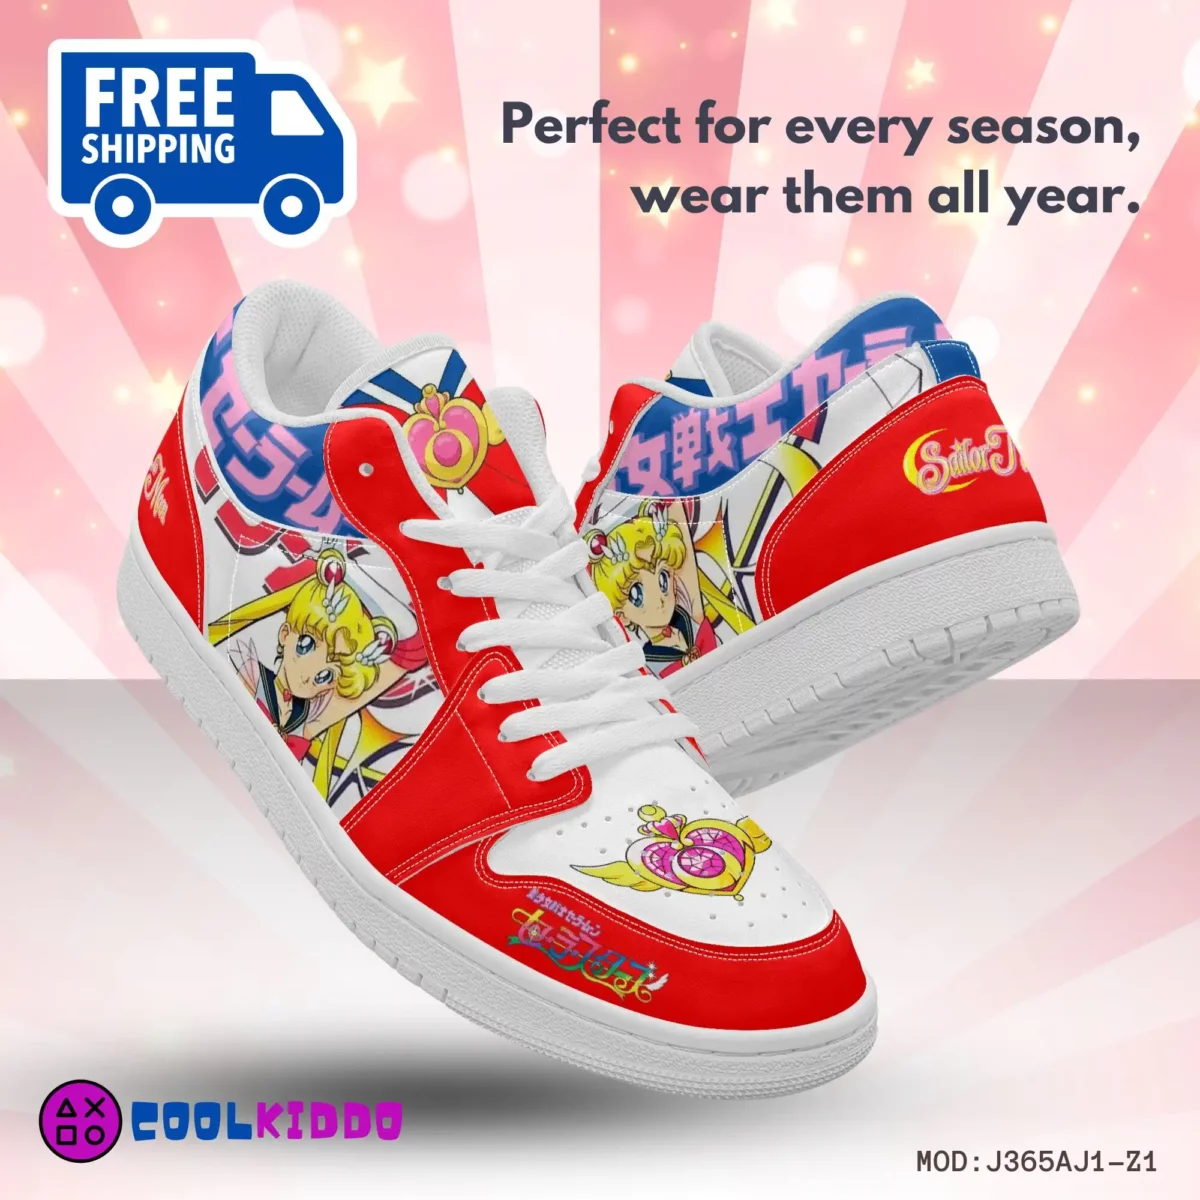 Salior Moon Anime Series Inspired Low-Top Leather Sneakers for youth/adults. Character Print Shoes Cool Kiddo 16